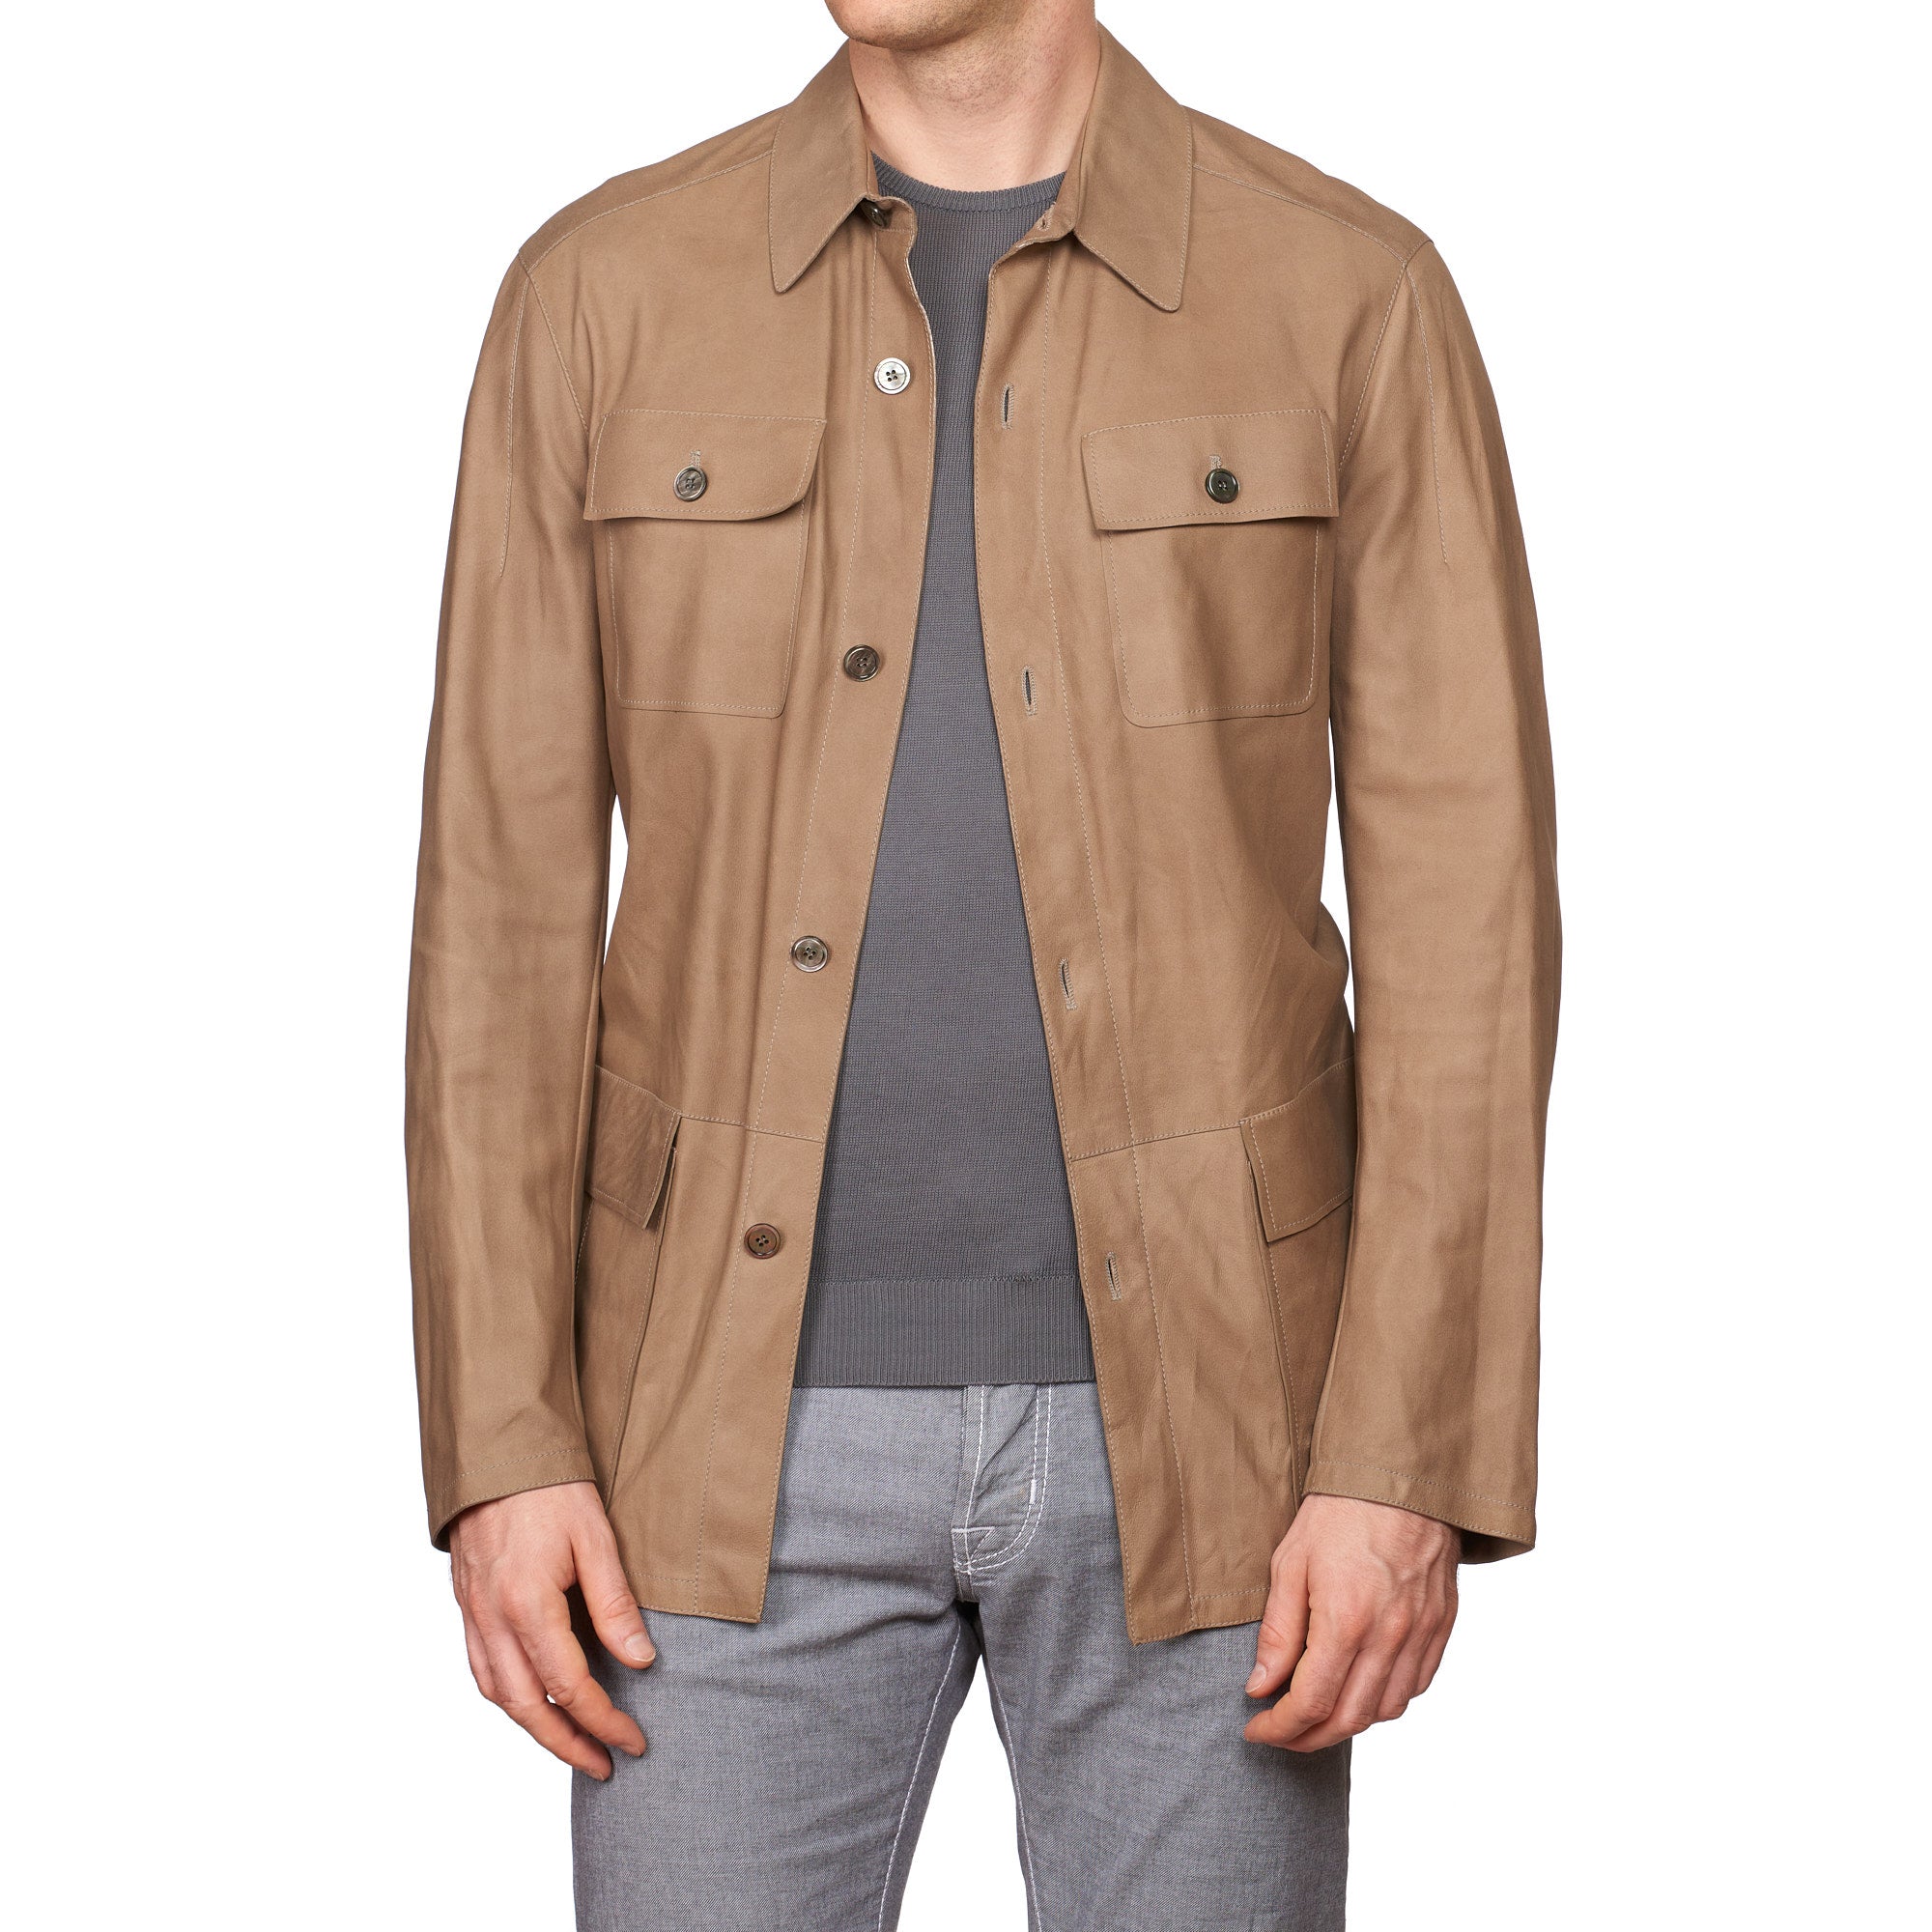 SERAPHIN Tan Suede Goat Leather Unlined Field Jacket FR 50 US M NEW SERAPHIN